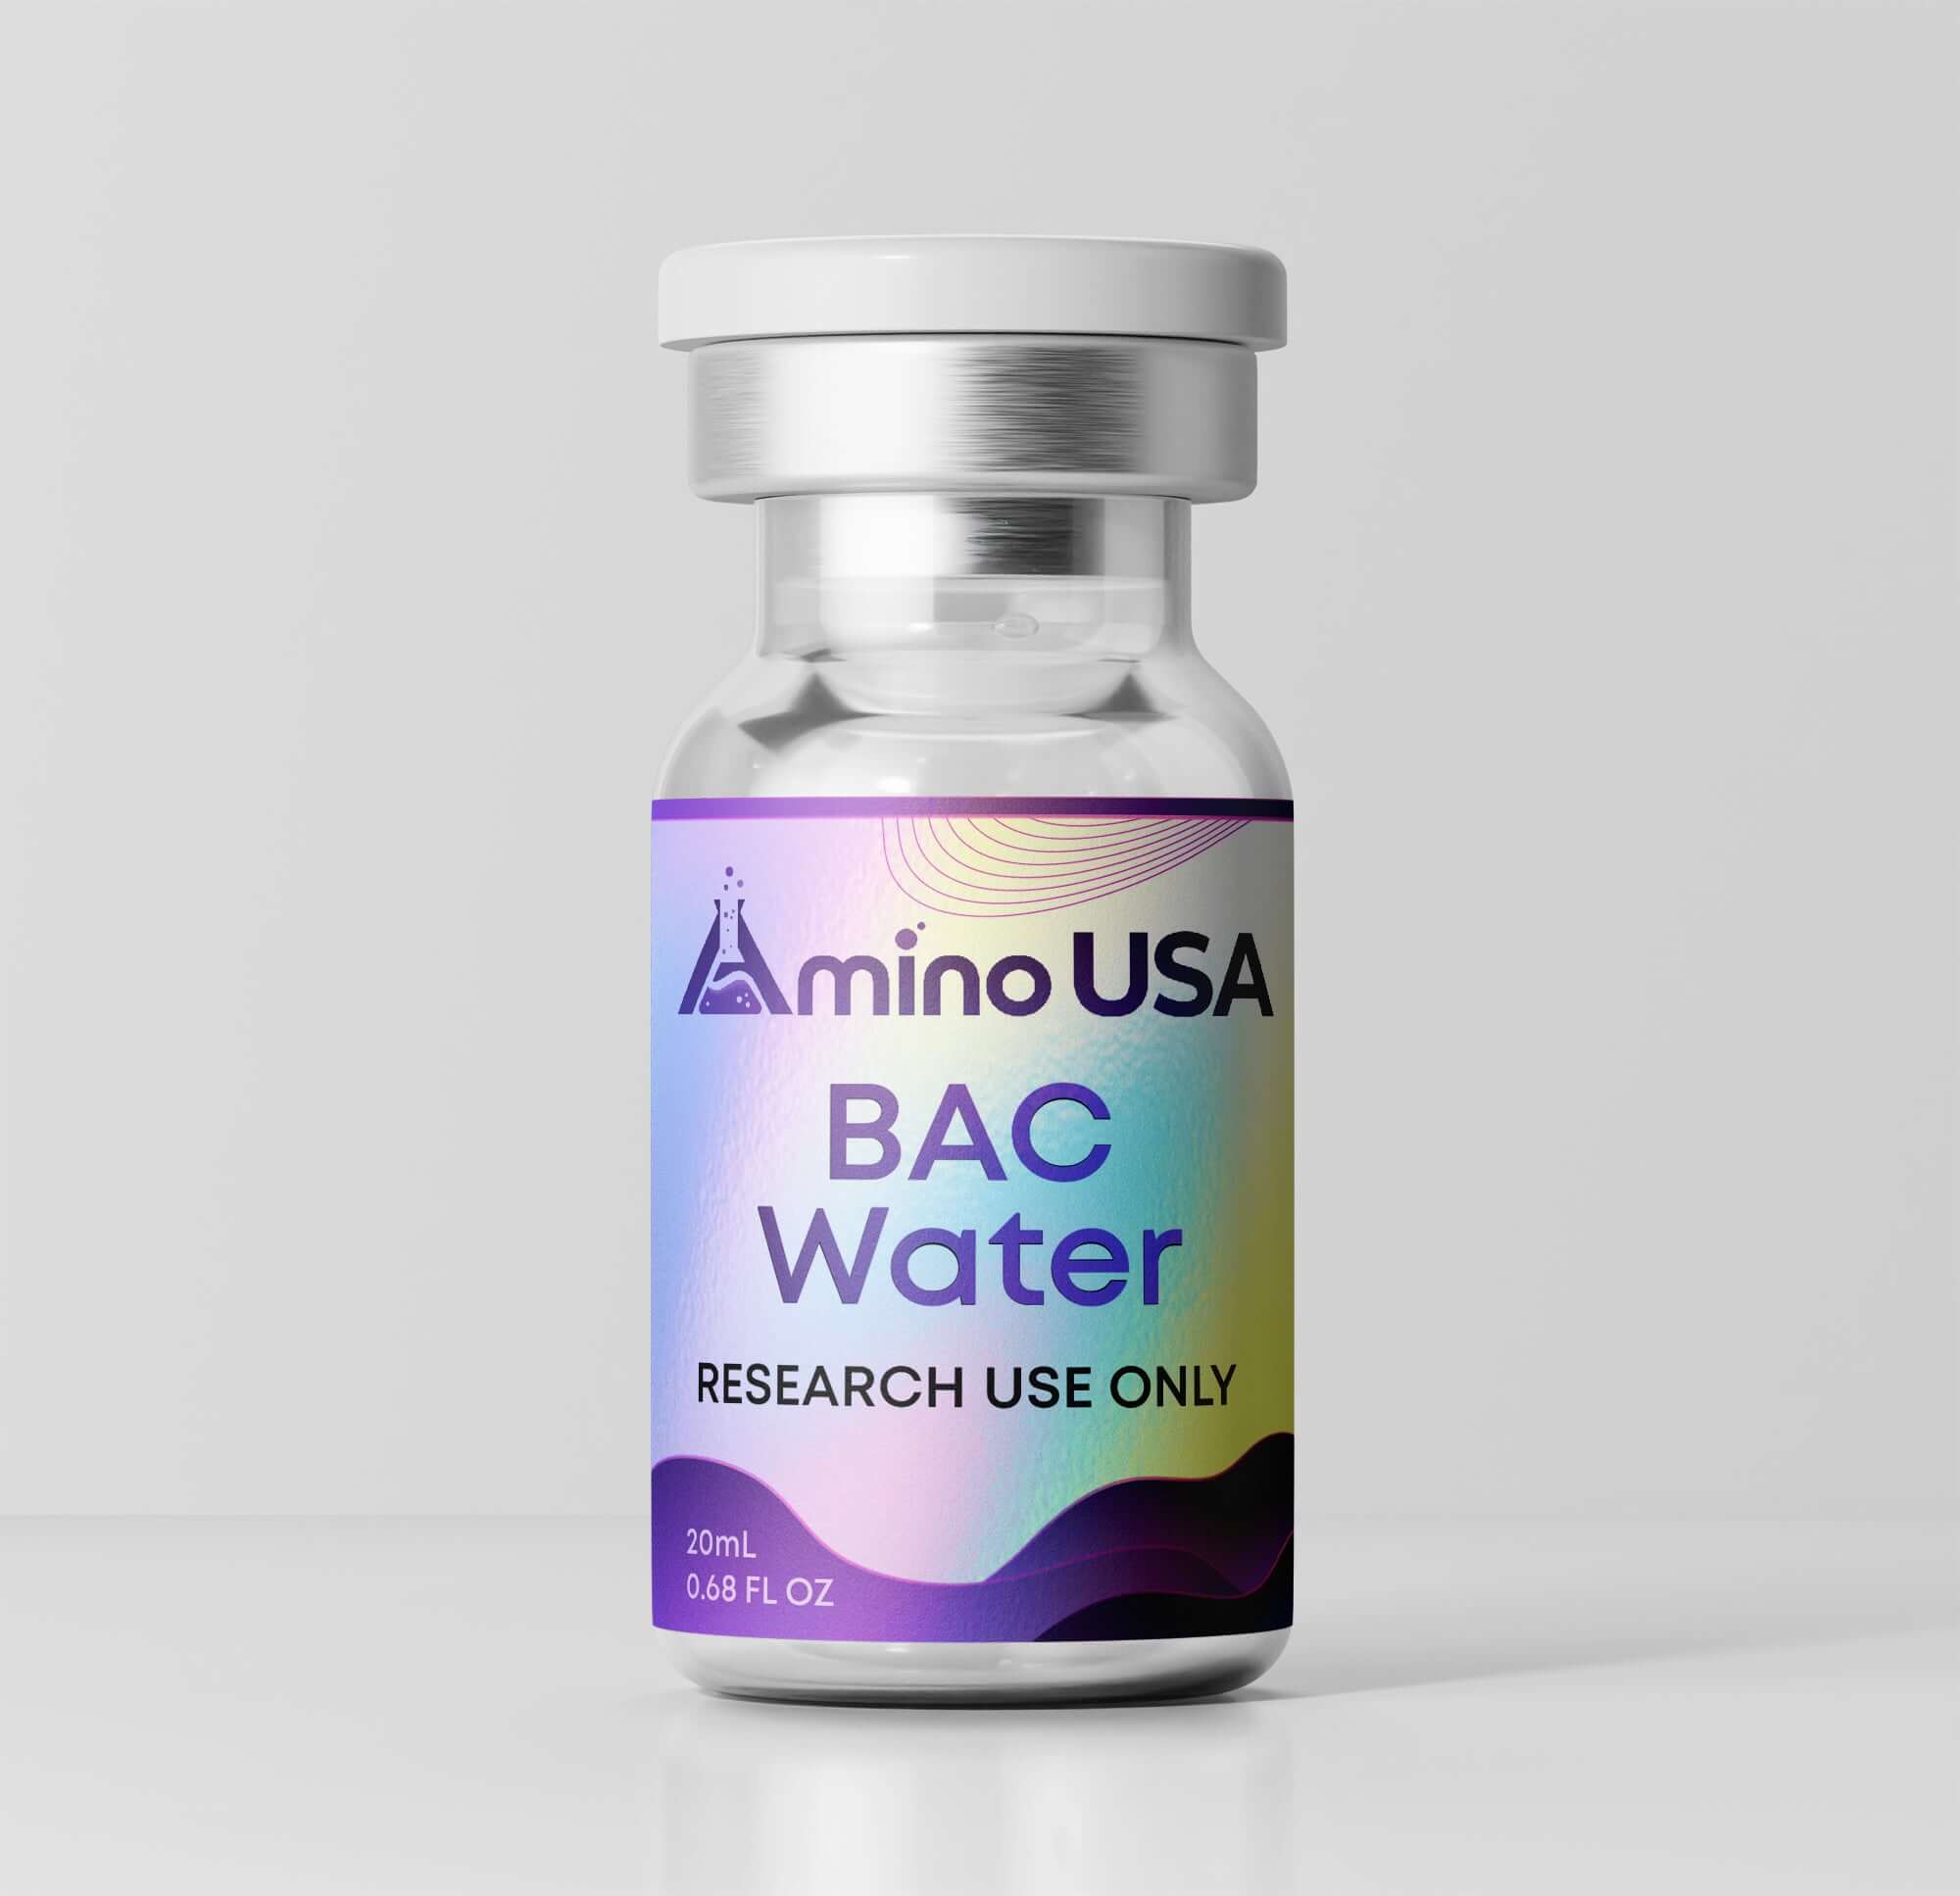 Amino USA Research Chemicals 10ml BAC Water 20ml RC-00047